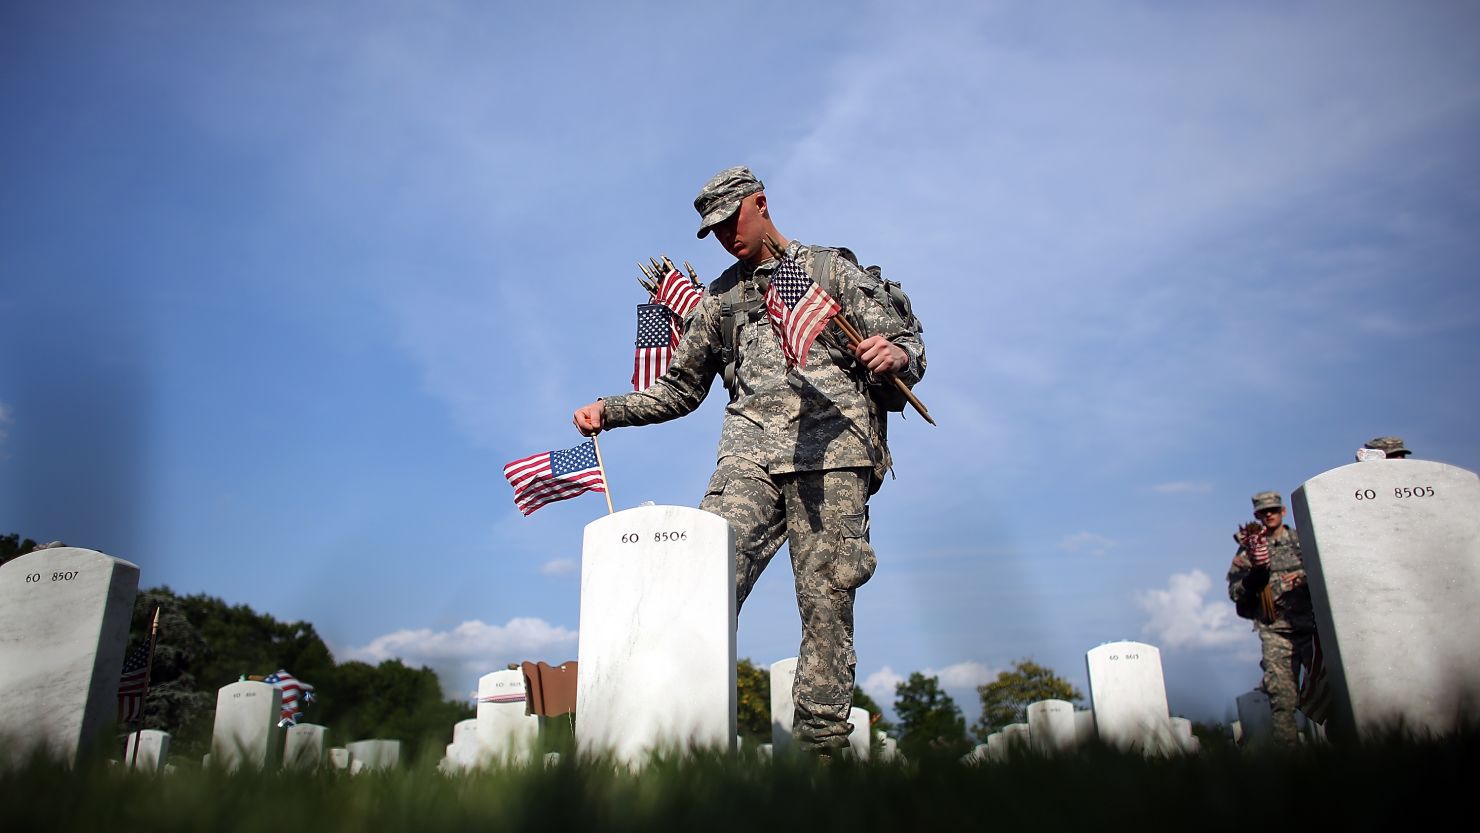 Members of the 3rd US Infantry Regiment place American flags at the graves of US soldiers buried at Arlington National Cemetery.